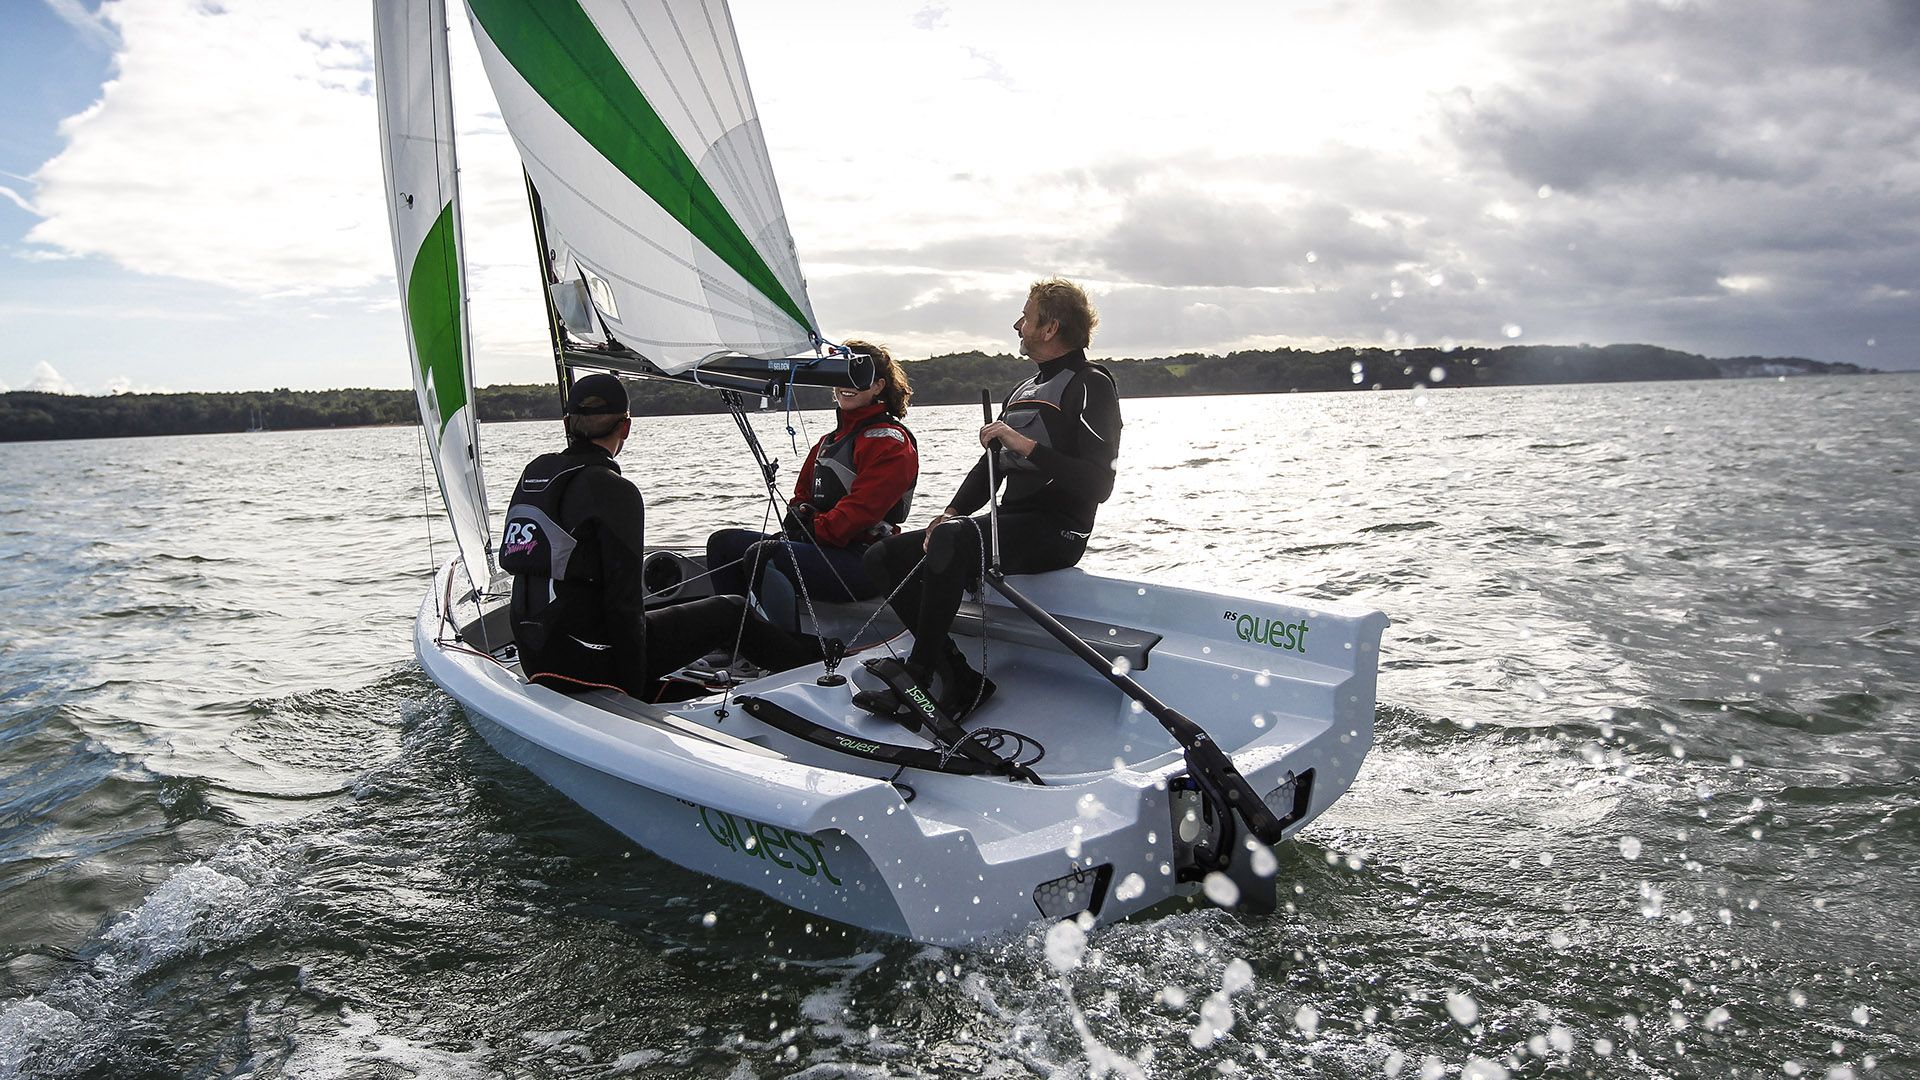 RS Quest –the best-seller for training or family sailing